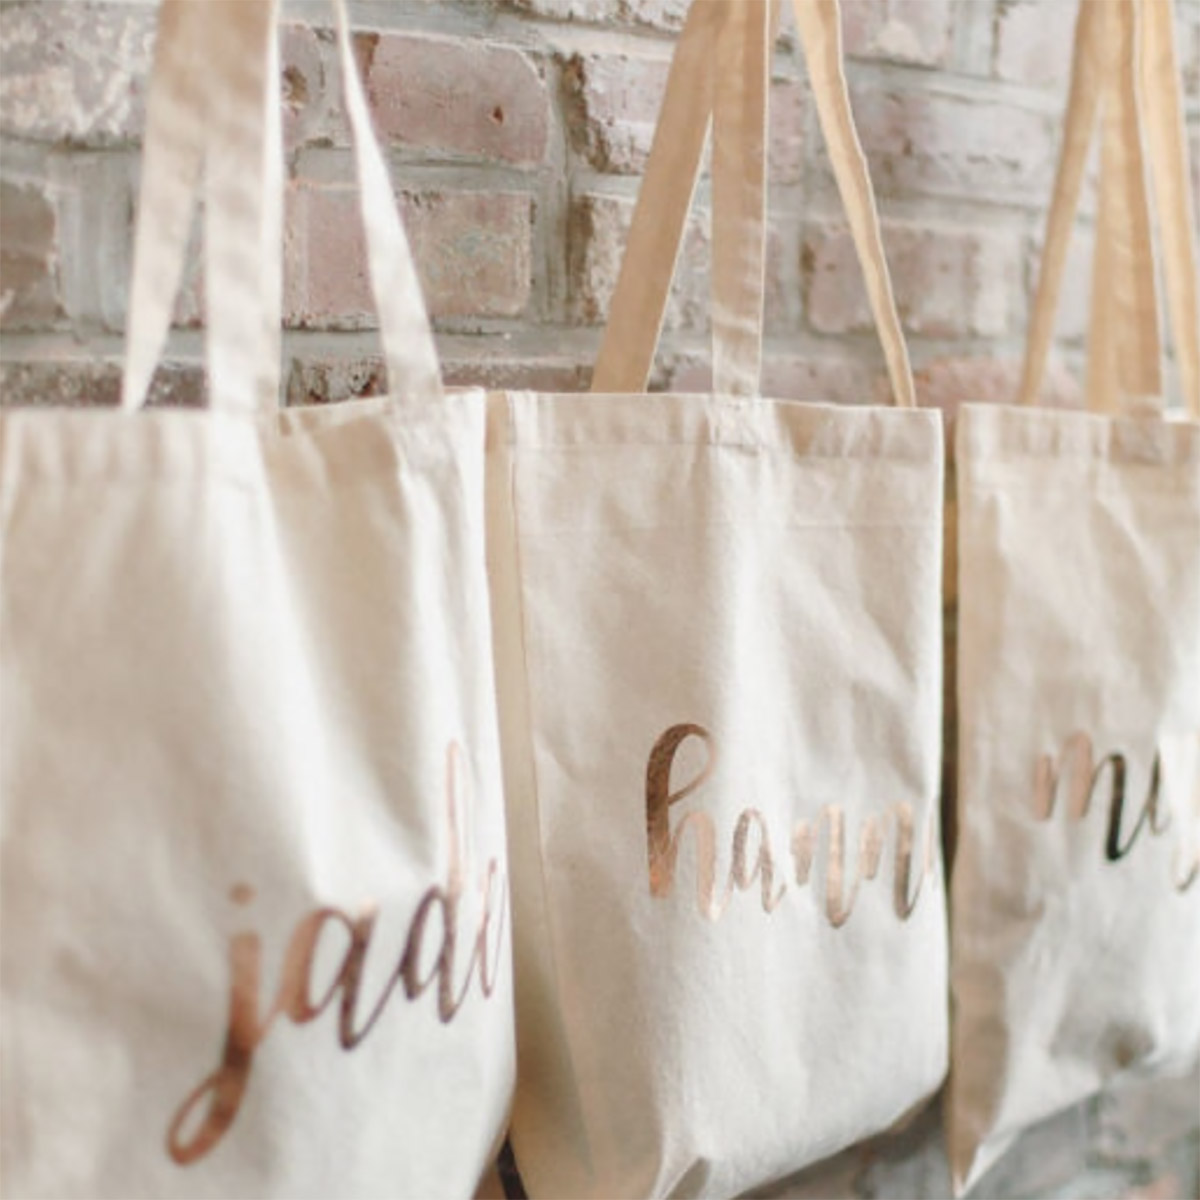 Personalized Bags, Patterned Canvas Bags